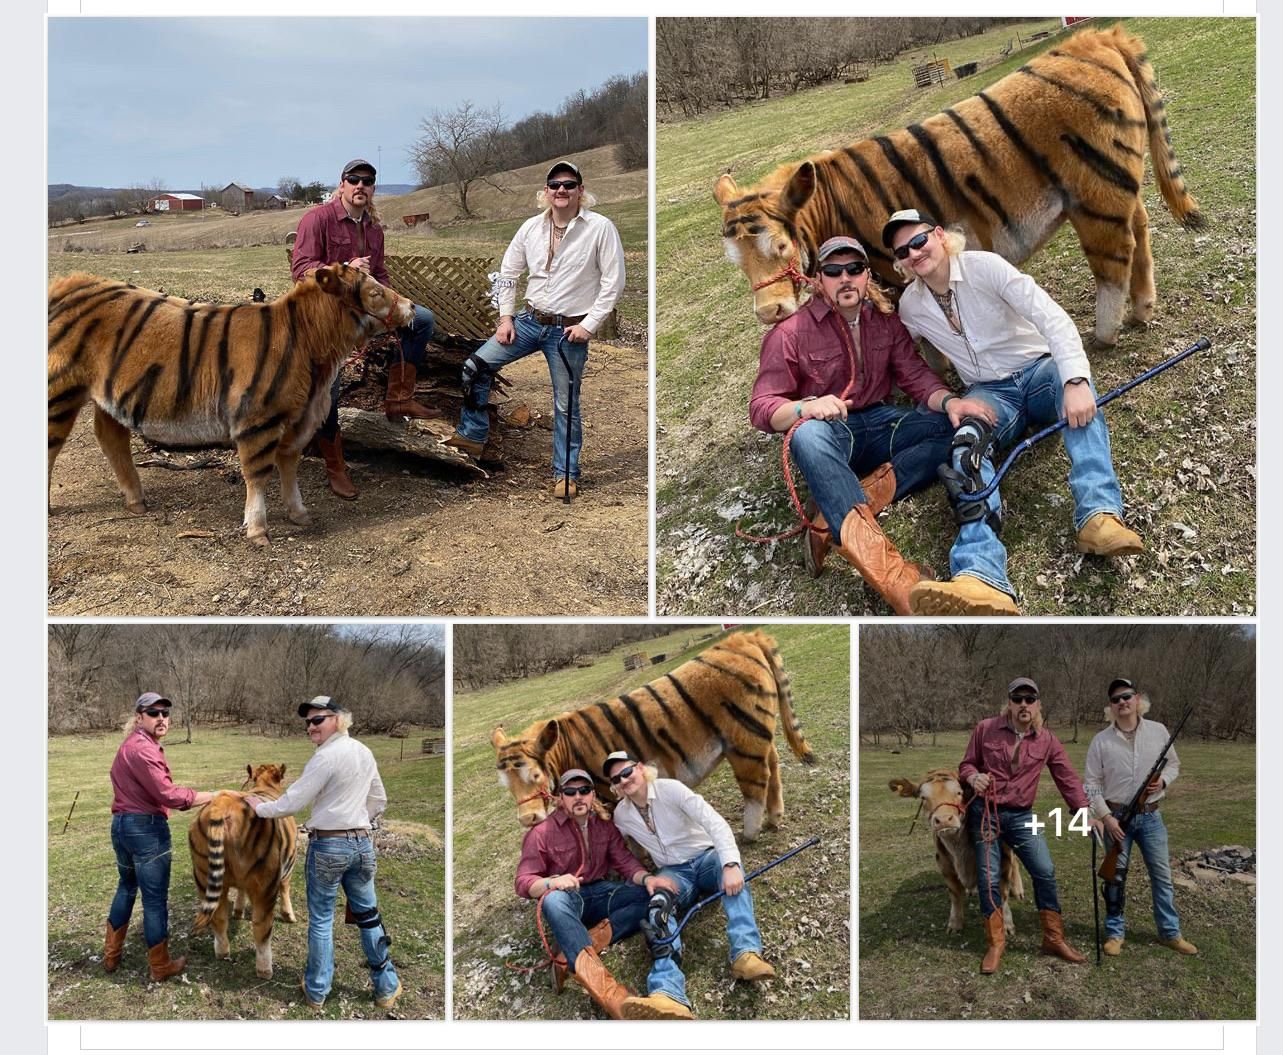 Some local boys painted a cow and did a tiger king photo shoot